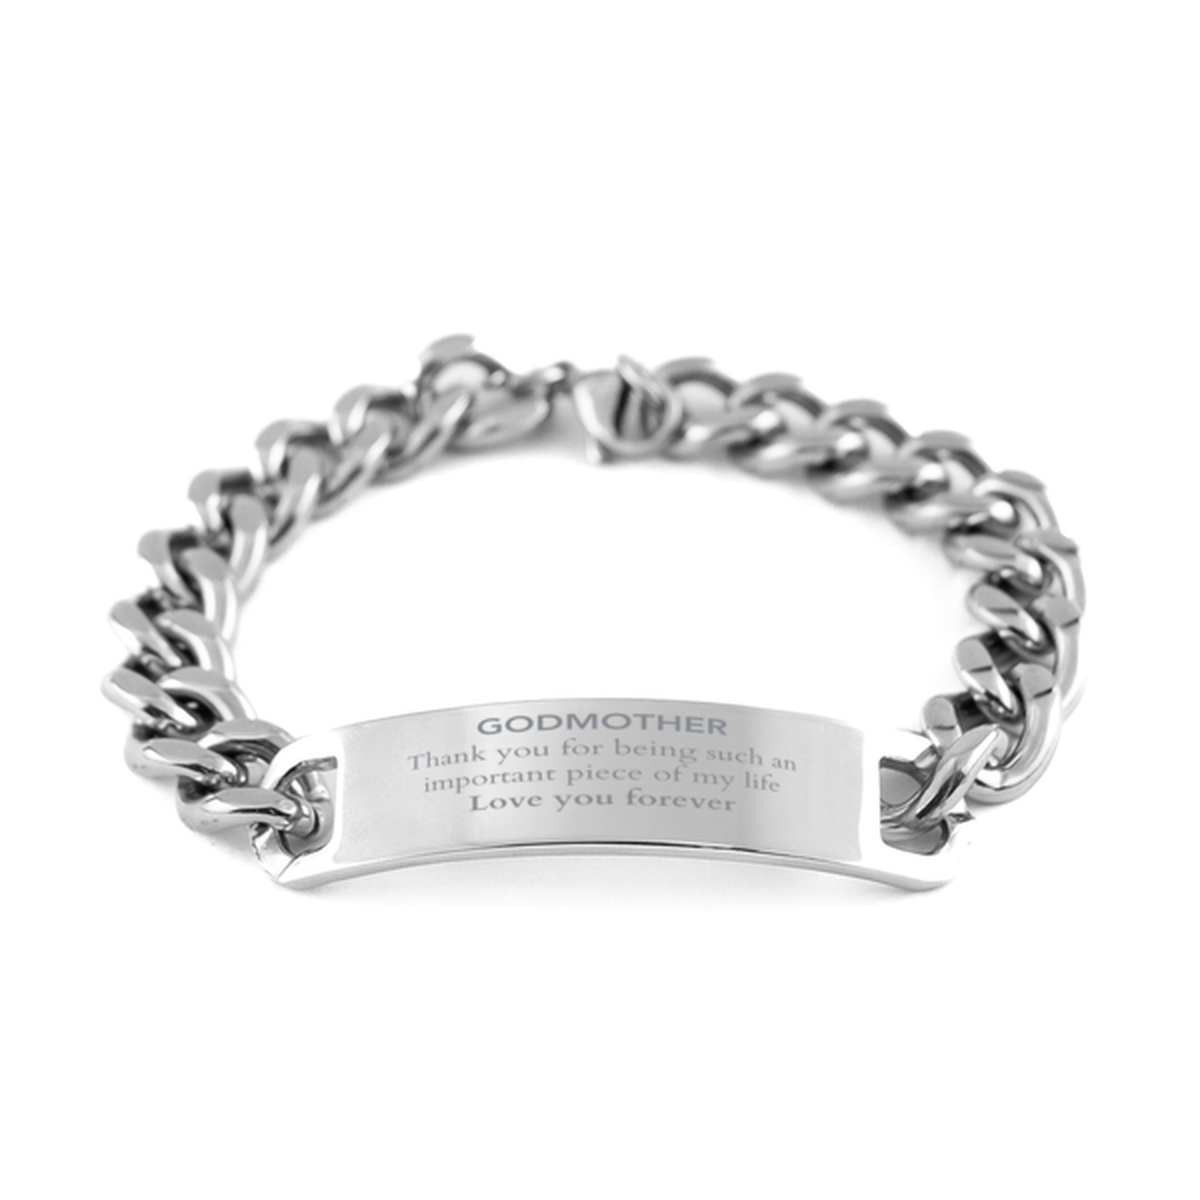 Appropriate Godmother Cuban Chain Stainless Steel Bracelet Epic Birthday Gifts for Godmother Thank you for being such an important piece of my life Godmother Christmas Mothers Fathers Day